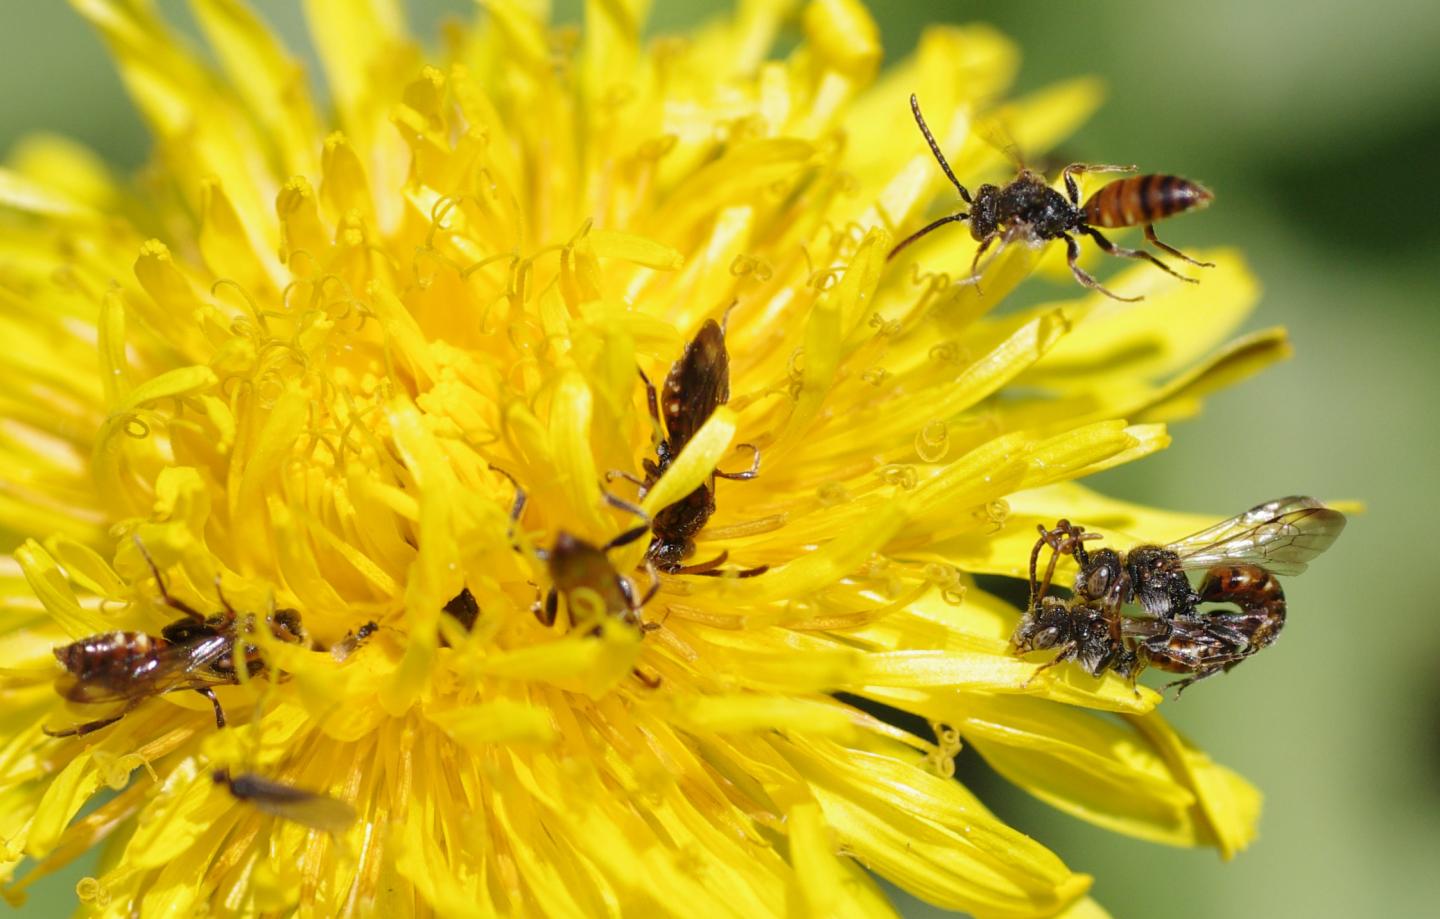 Males Patrolling at a Blossom of a Common Dandelion